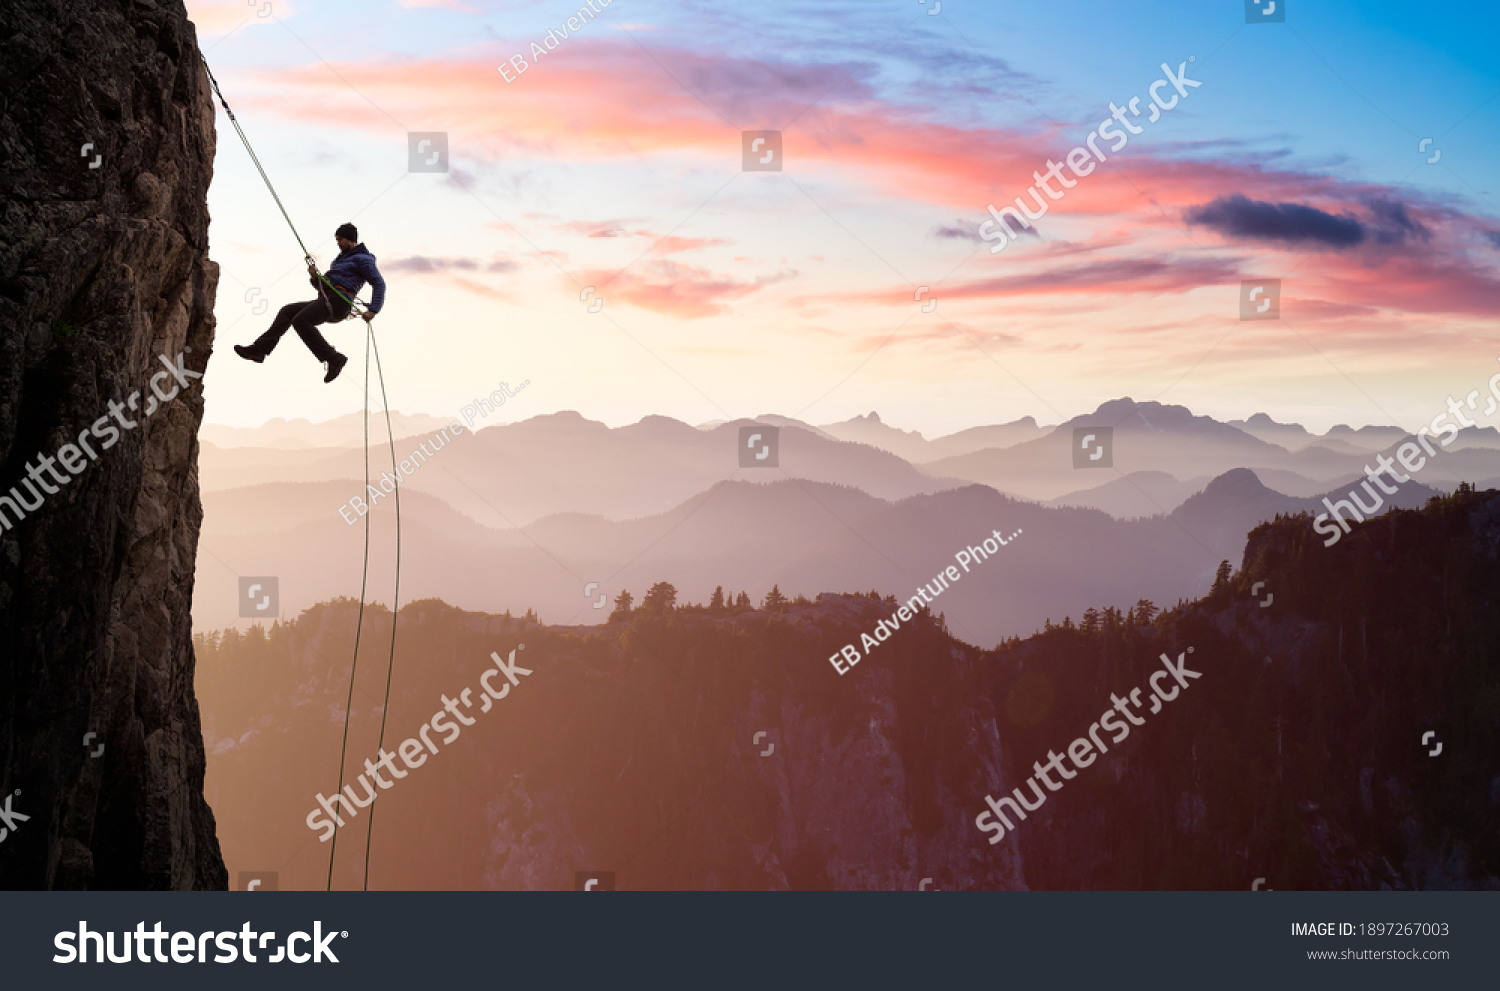 Adventurous Man Rappelling from Cliff. Aerial view of the mountains during a colorful and vibrant sunset or sunrise. Landscape taken in British Columbia, Canada. composite. Concept: Adventure #1897267003